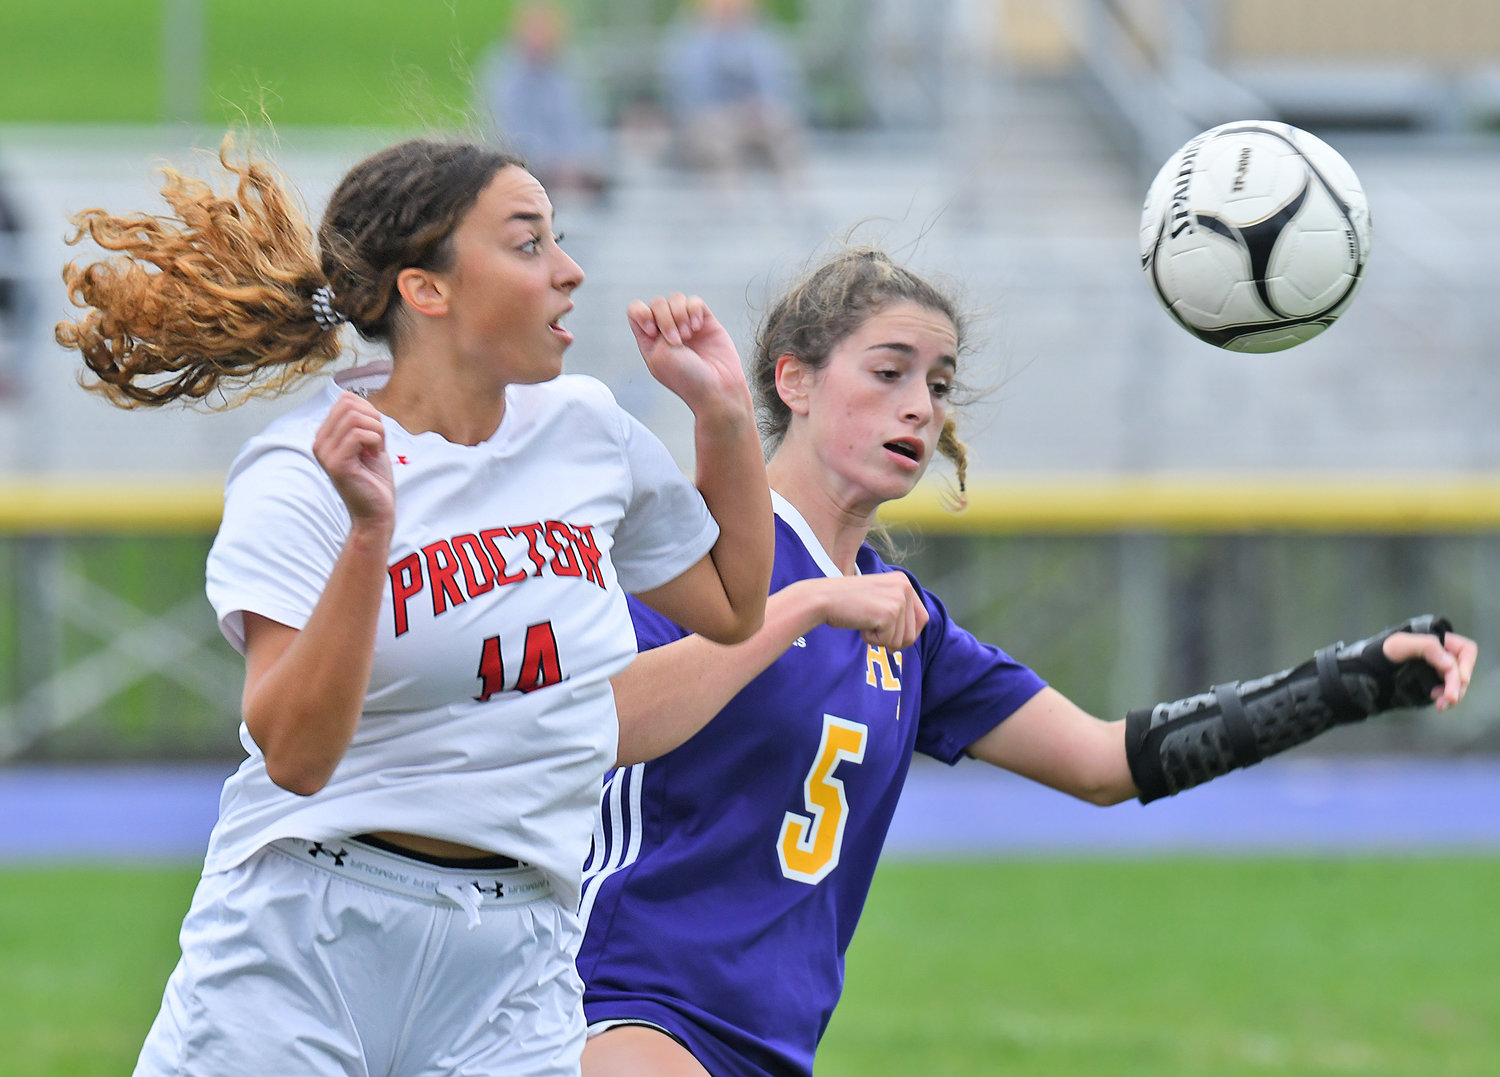 Proctor’s Kaia Singleton and Holland Patent’s Makenzie Stalker try to get position on the ball late in the first half during Tuesday’s Tri-Valley League game in Holland Patent. Golden Knights won 2-0 as Pazia Grocholski and Brianna Mullins each scored a goal.